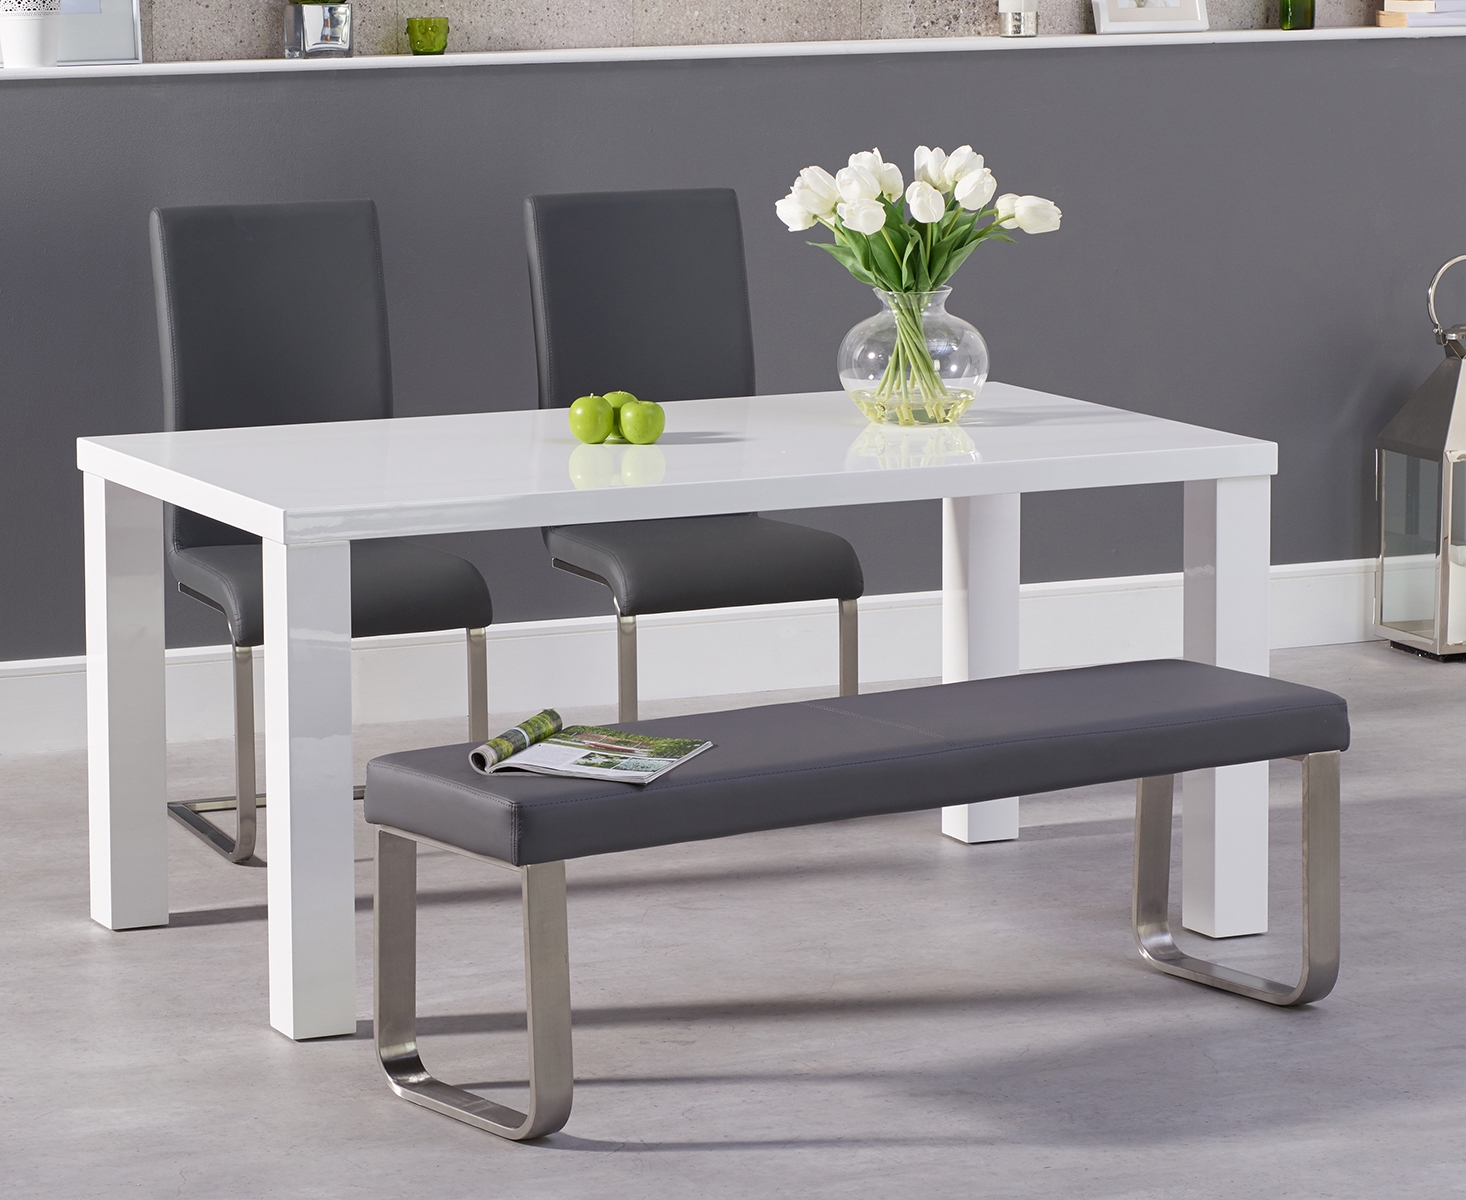 Photo 1 of Atlanta 160cm white high gloss dining table with 4 grey austin chairs with 2 grey benches